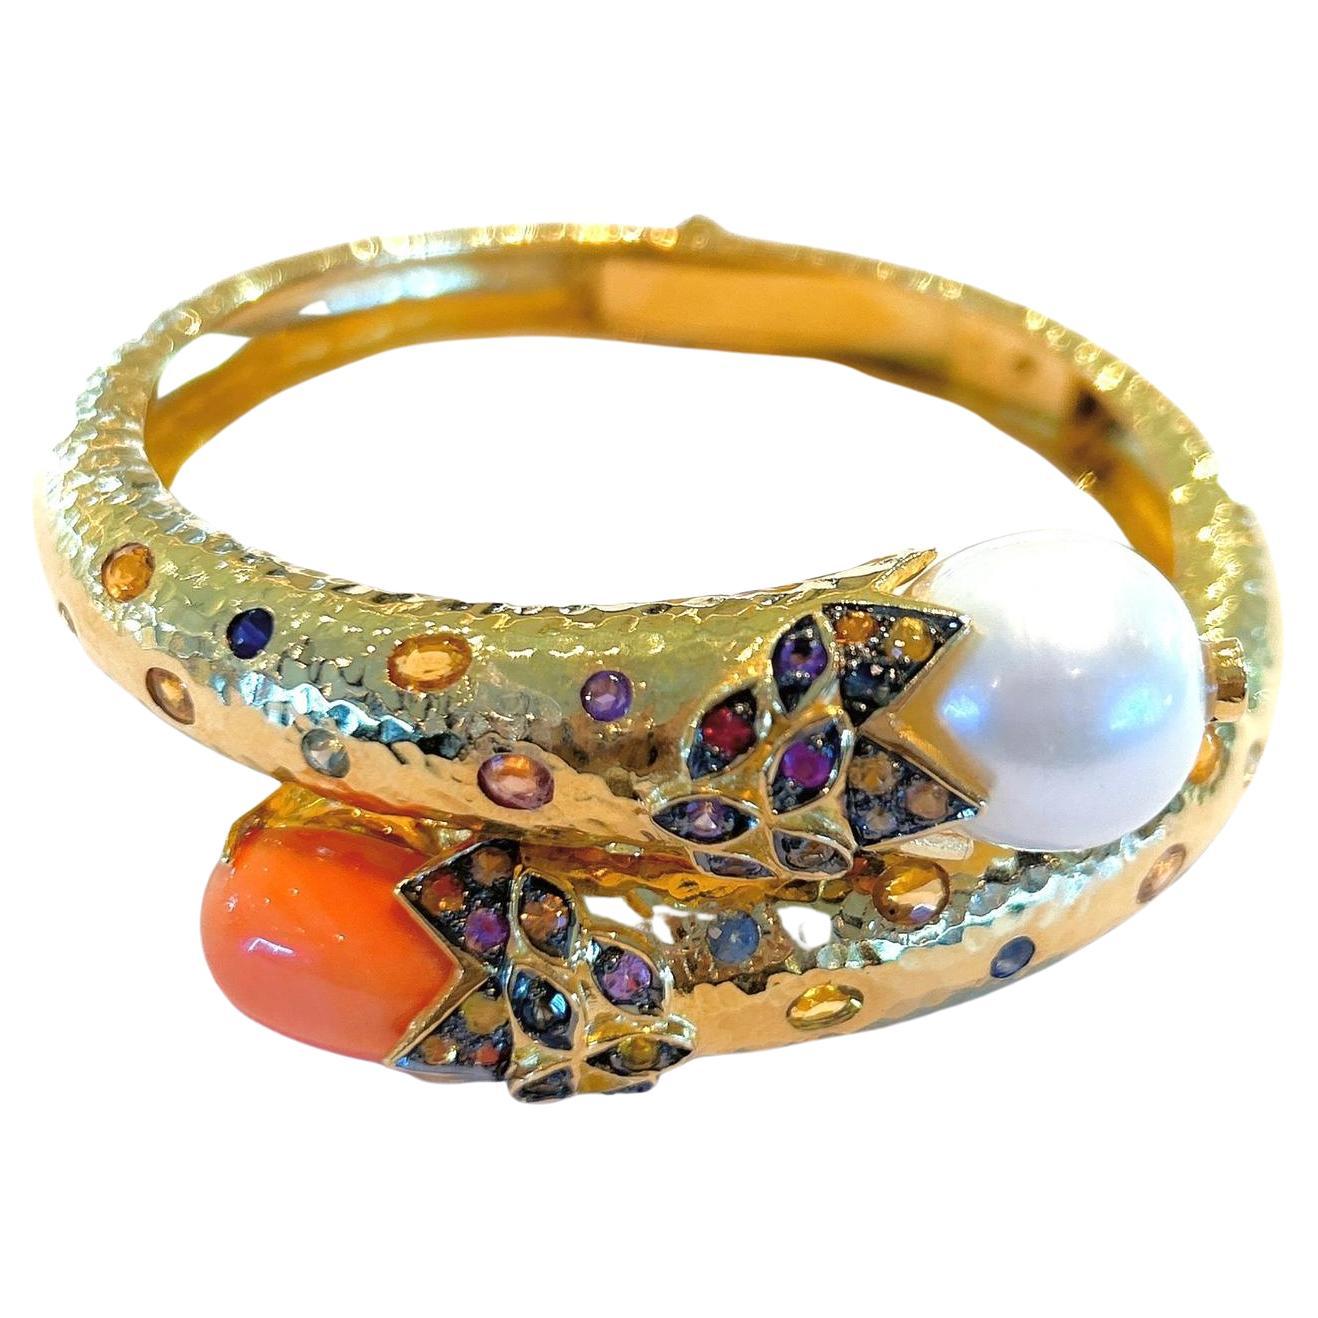 Baroque BOCHIC “Orient” Bangle Set 22k Gold & Silver with Pearls & Fancy Color Sapphires